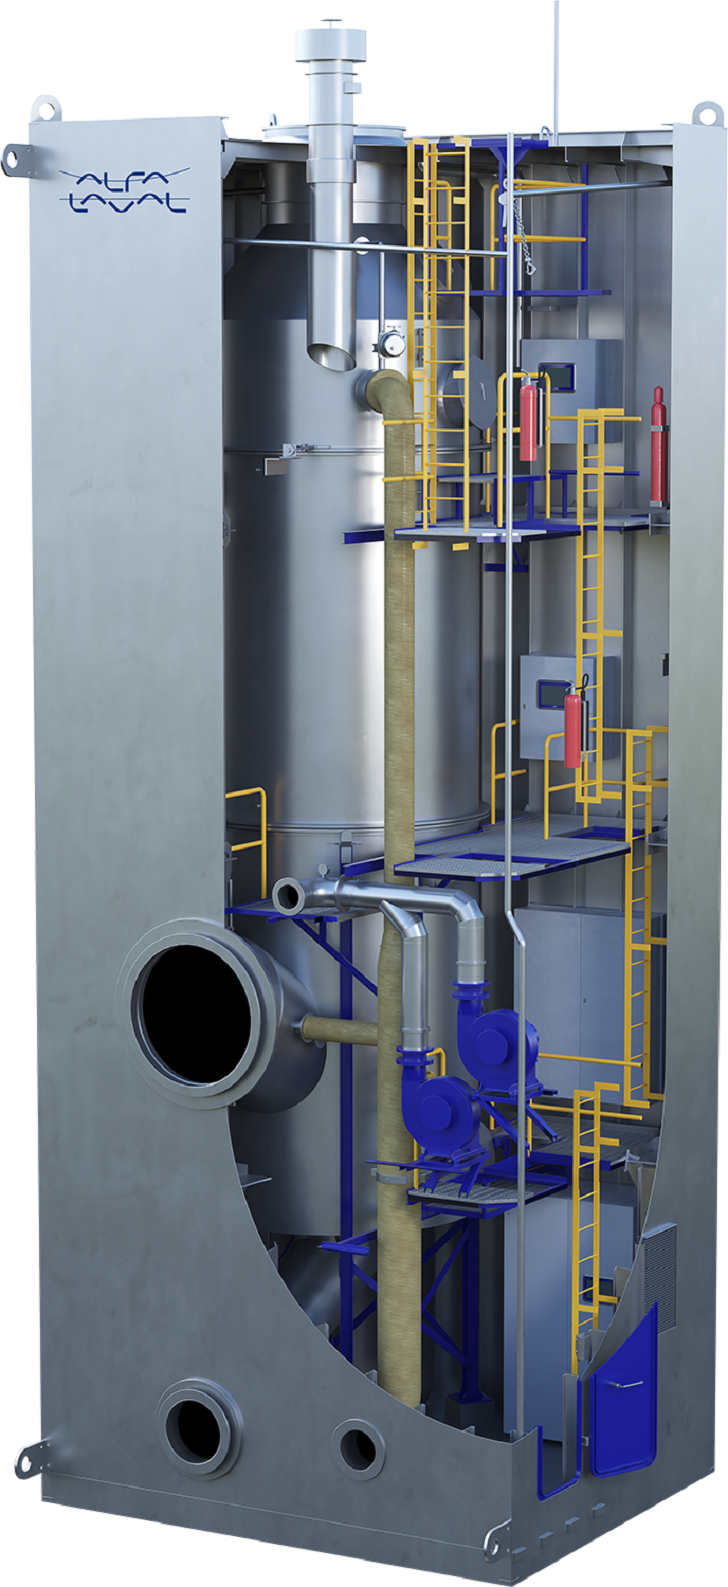 Alfa Laval's PureSOx Express is designed for up to 75 tonnes of exhaust gas per hour and engine power up to 10 MW.